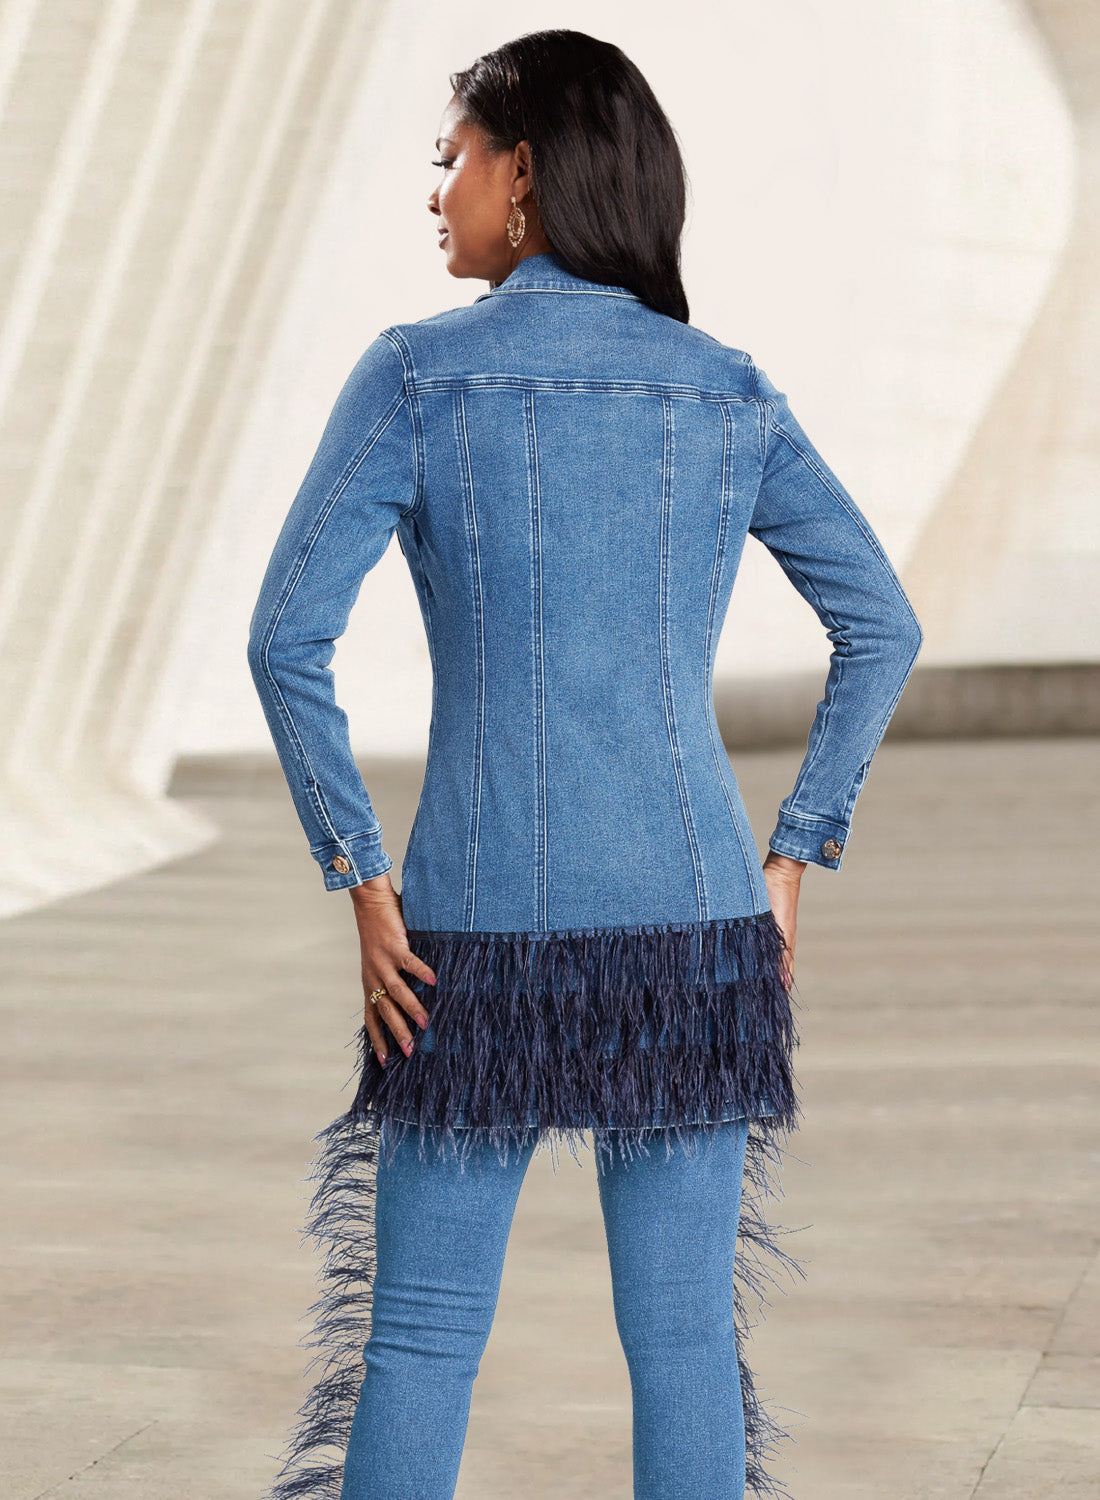 DV Jeans - 8456J - Premium Soft Stretch Denim Jacket Trimmed with Feathers and Gold Buttons